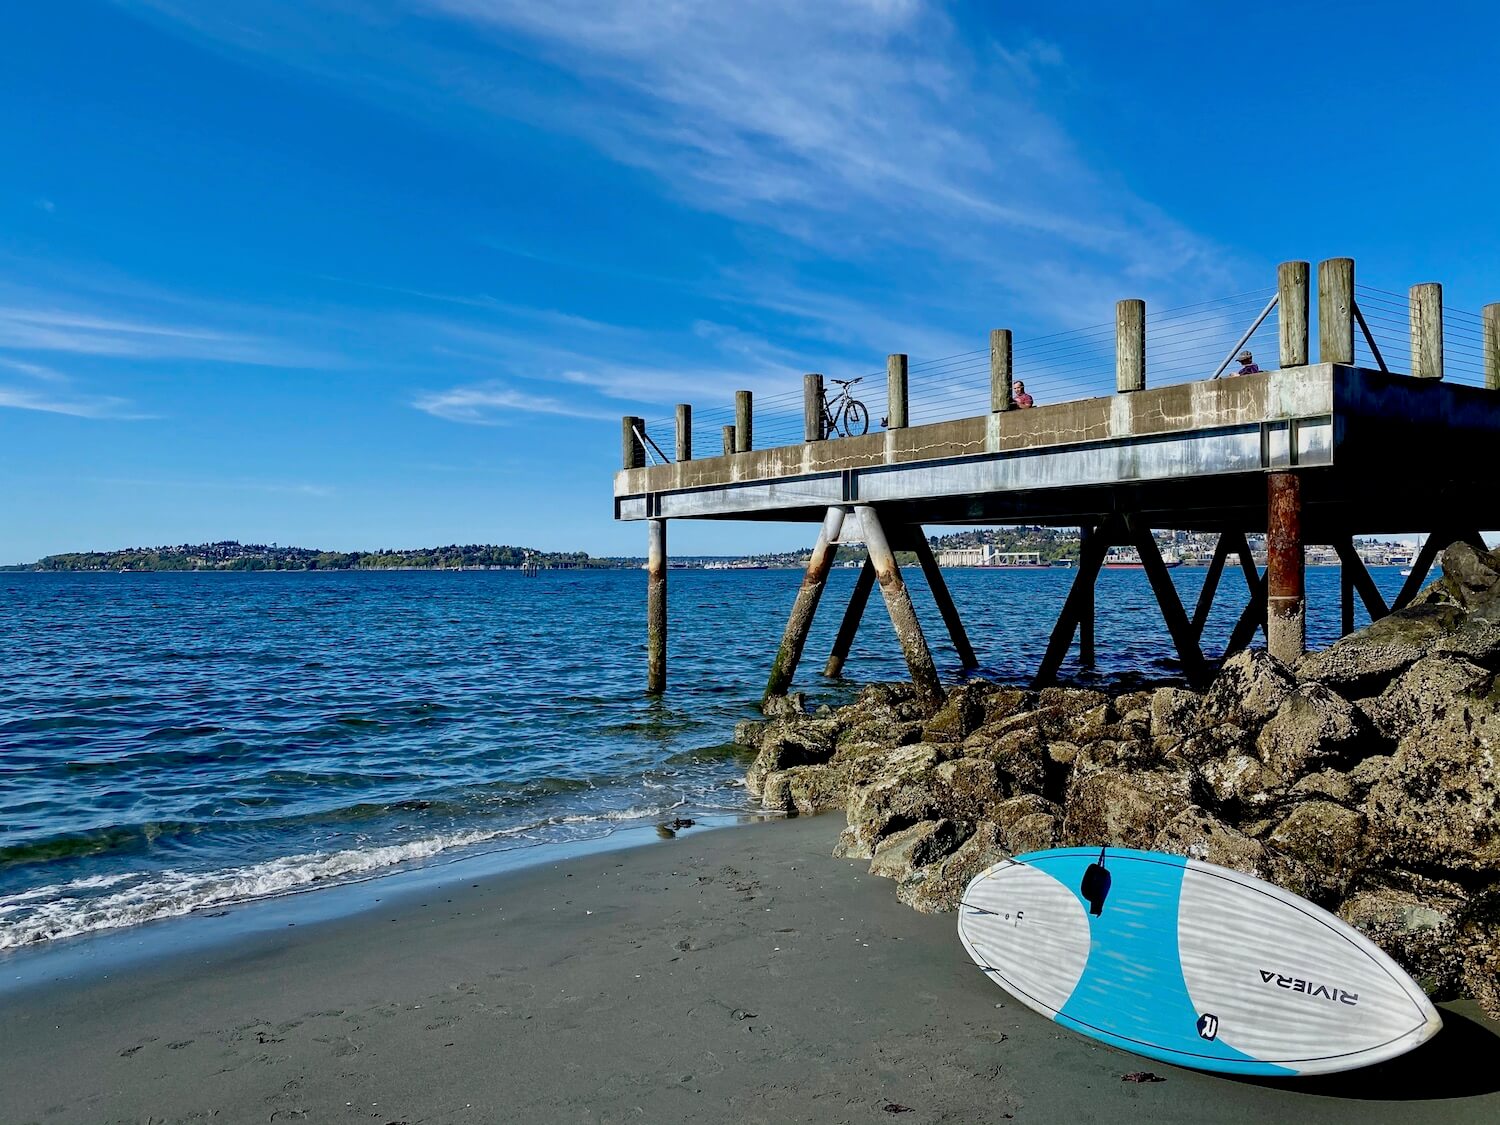 Stand up paddle boarding is a popular thing to do in West Seattle and this photo shows a blue and white paddle board leaned up against some large barnacle covered rocks supporting a metal and concrete pier which juts out into the Puget Sound from Alki Beach in West Seattle. The water is greenish blue and sky bright blue with a few scattered white clouds.